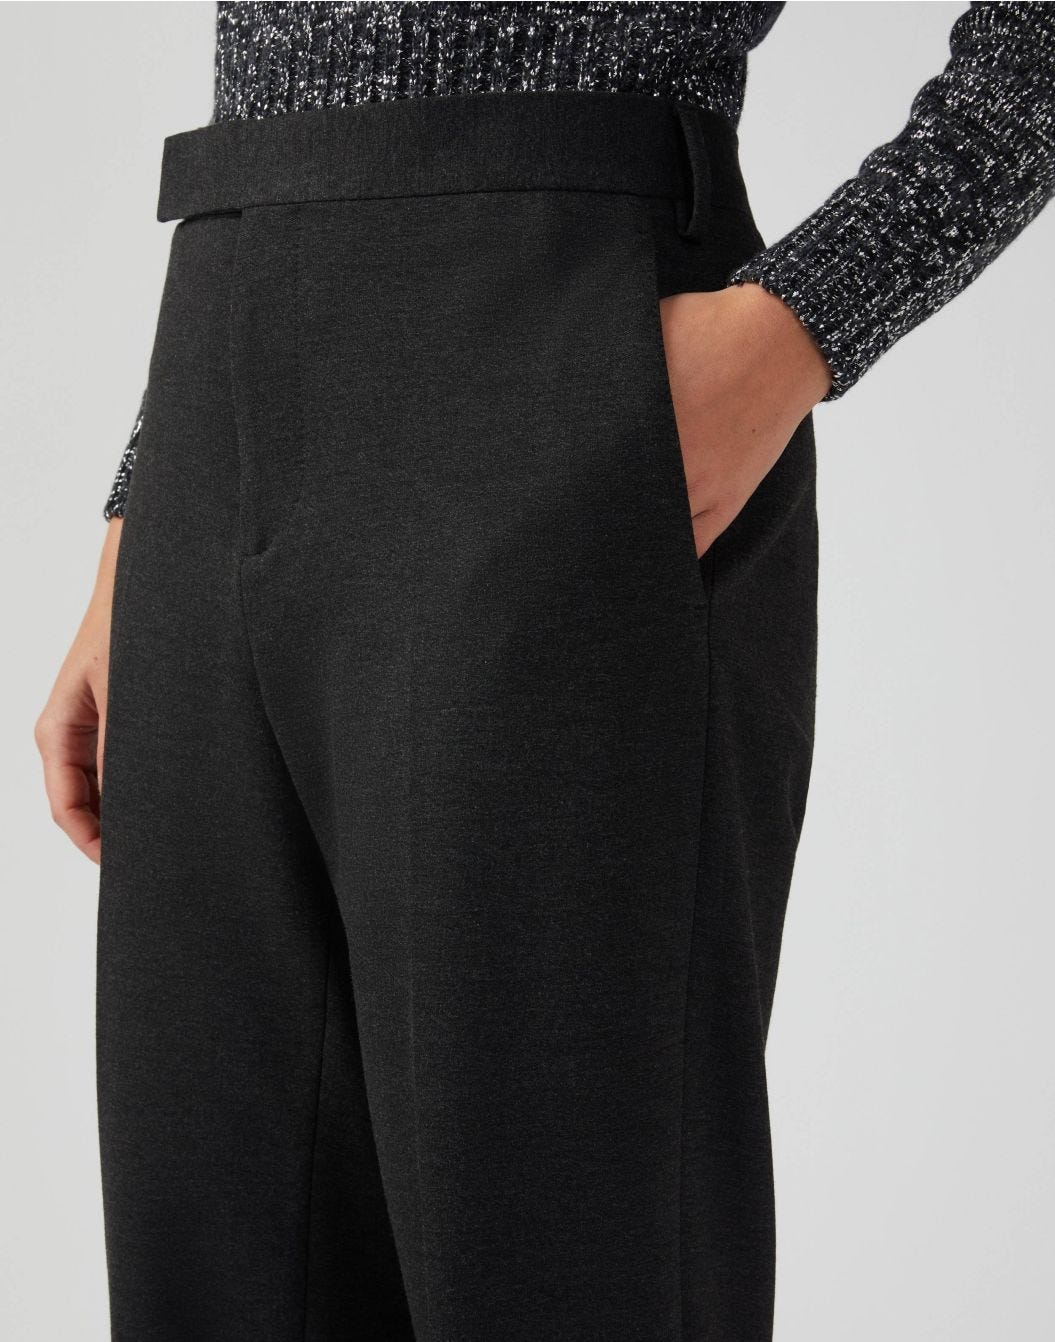 Classic grey trousers in Milanese warp knit viscose 